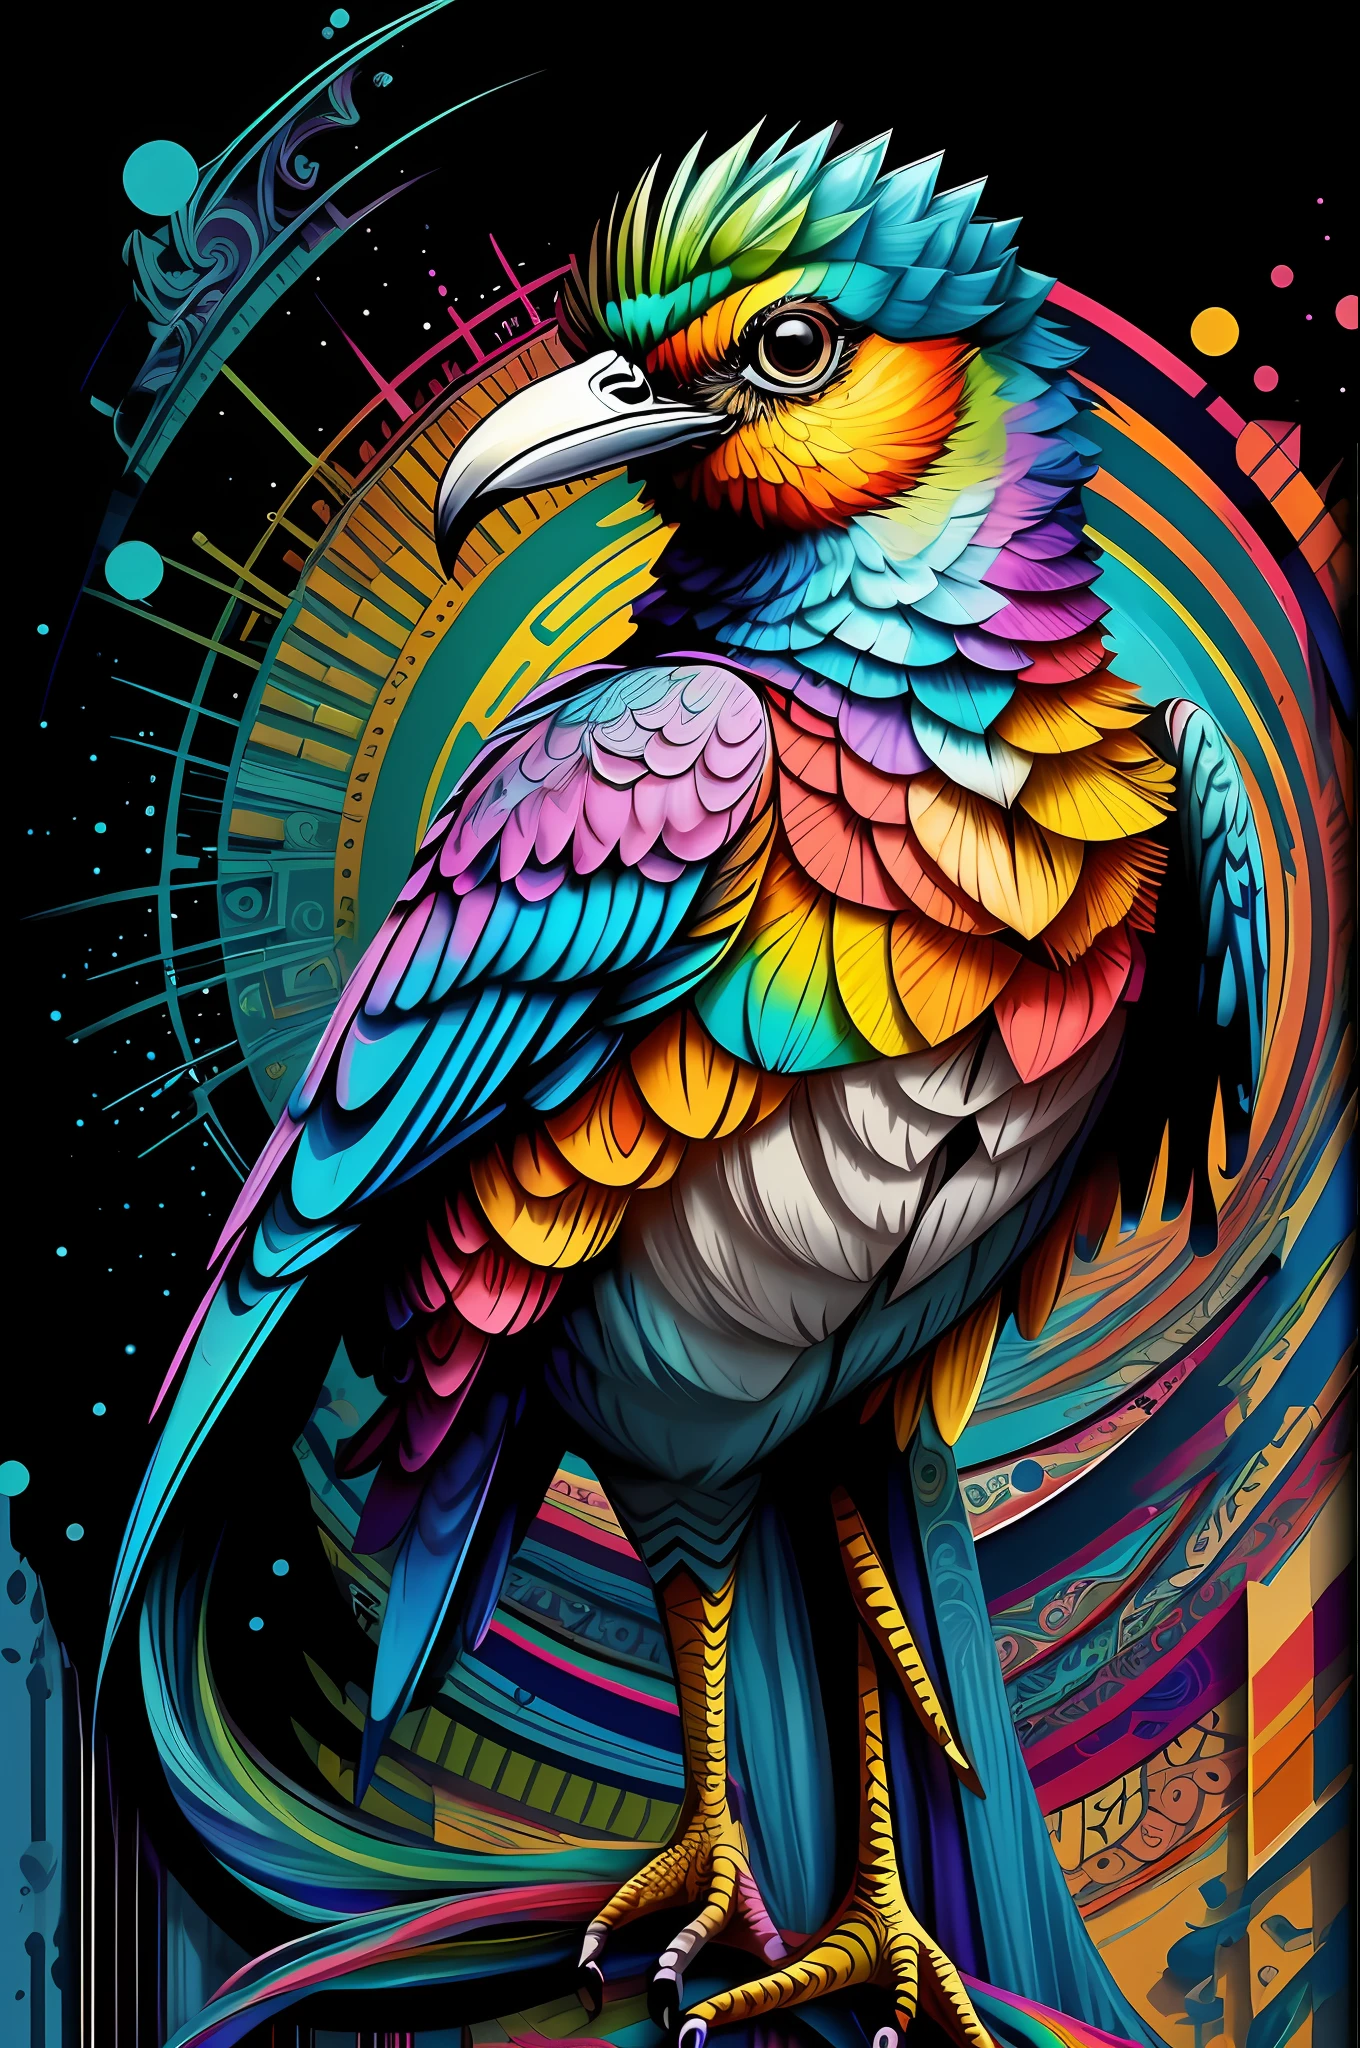 (Cortiçol Yellow-bellied bird)),  Eduardo Kobra quilting ,multidimensional geometric wall PORTRAIT, artistry, chibi,
yang016k, comely, Vibrant coloring,
Primary works, top-quality, best qualityer, offcial art, Beautiful and Aesthetic, ),  Eduardo Kobra quilting ,multidimensional geometric wall PORTRAIT, artistry, chibi,
yang016k, comely, Colouring,
Primary works, top-quality, best qualityer, offcial art, Beautiful and Aesthetic,